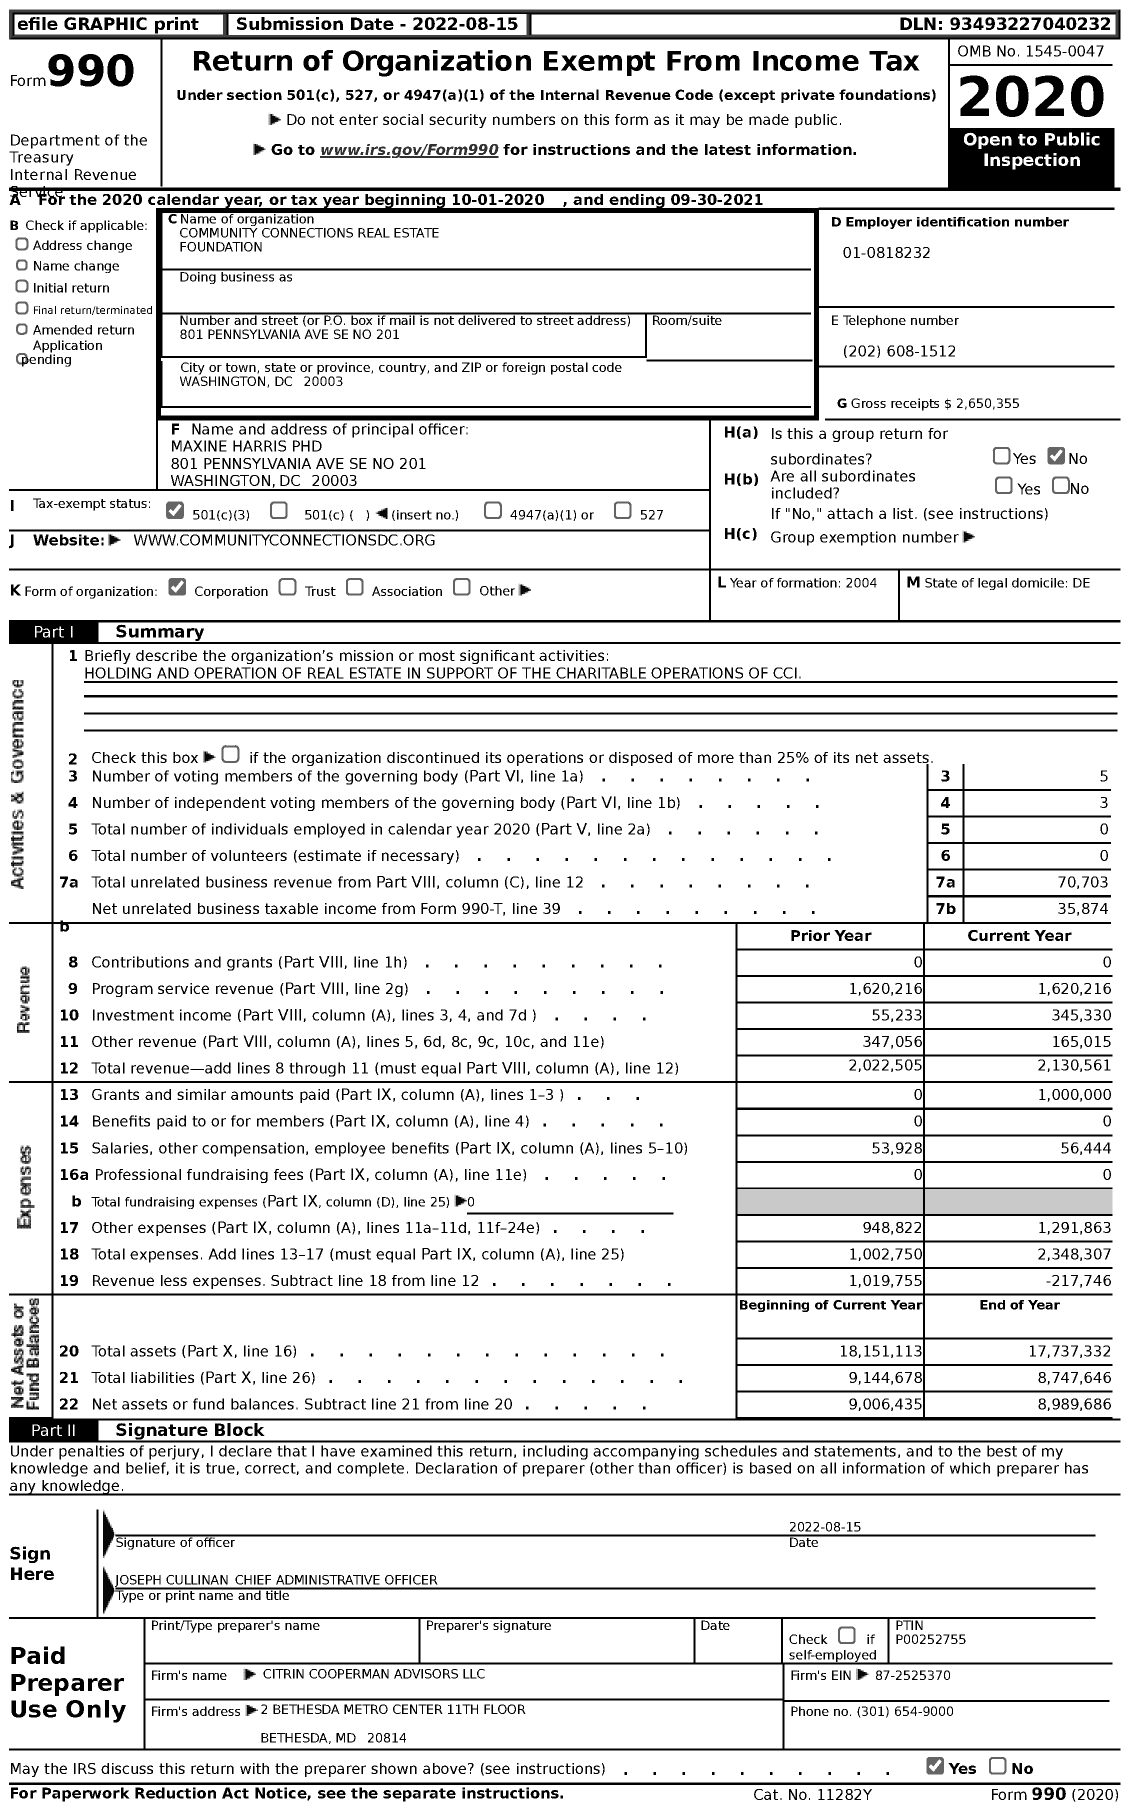 Image of first page of 2020 Form 990 for Community Connections Real Estate Foundation